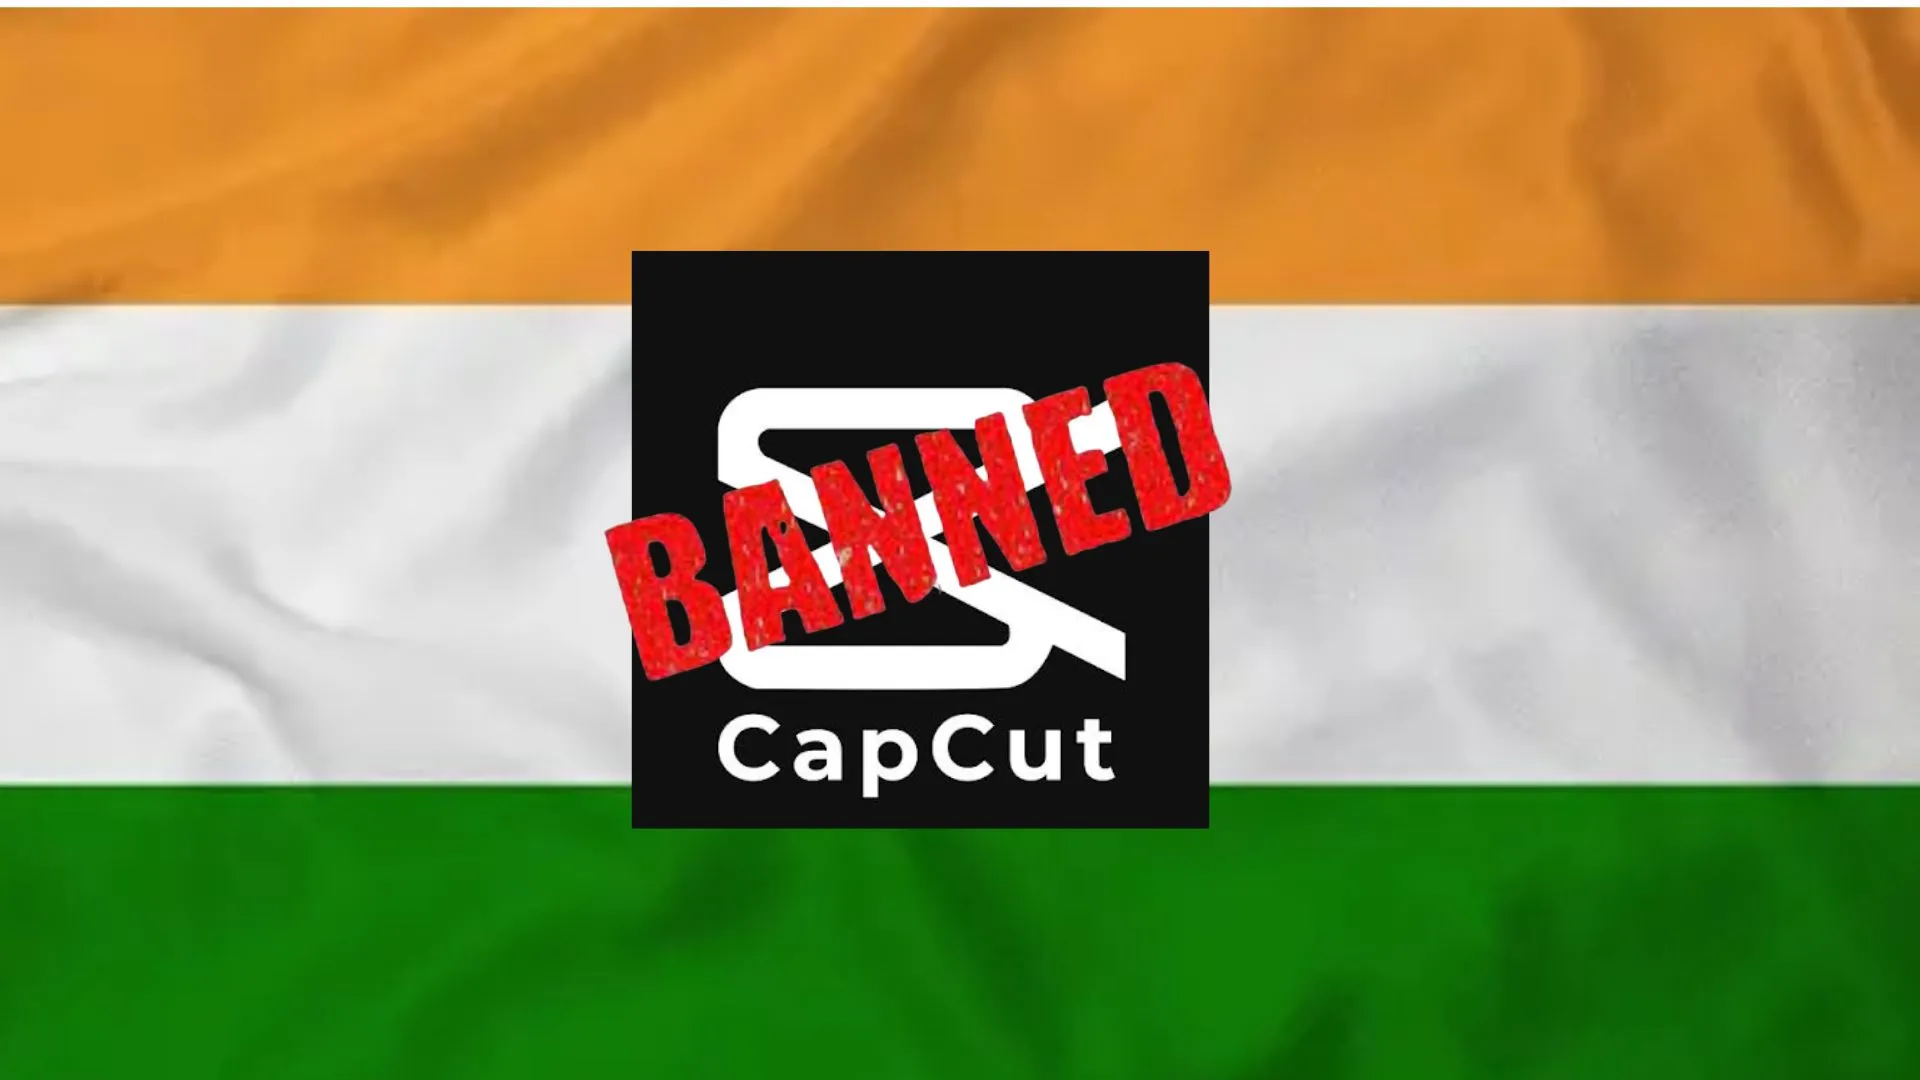 Indian flag with a Capcut logo and banned written over it.